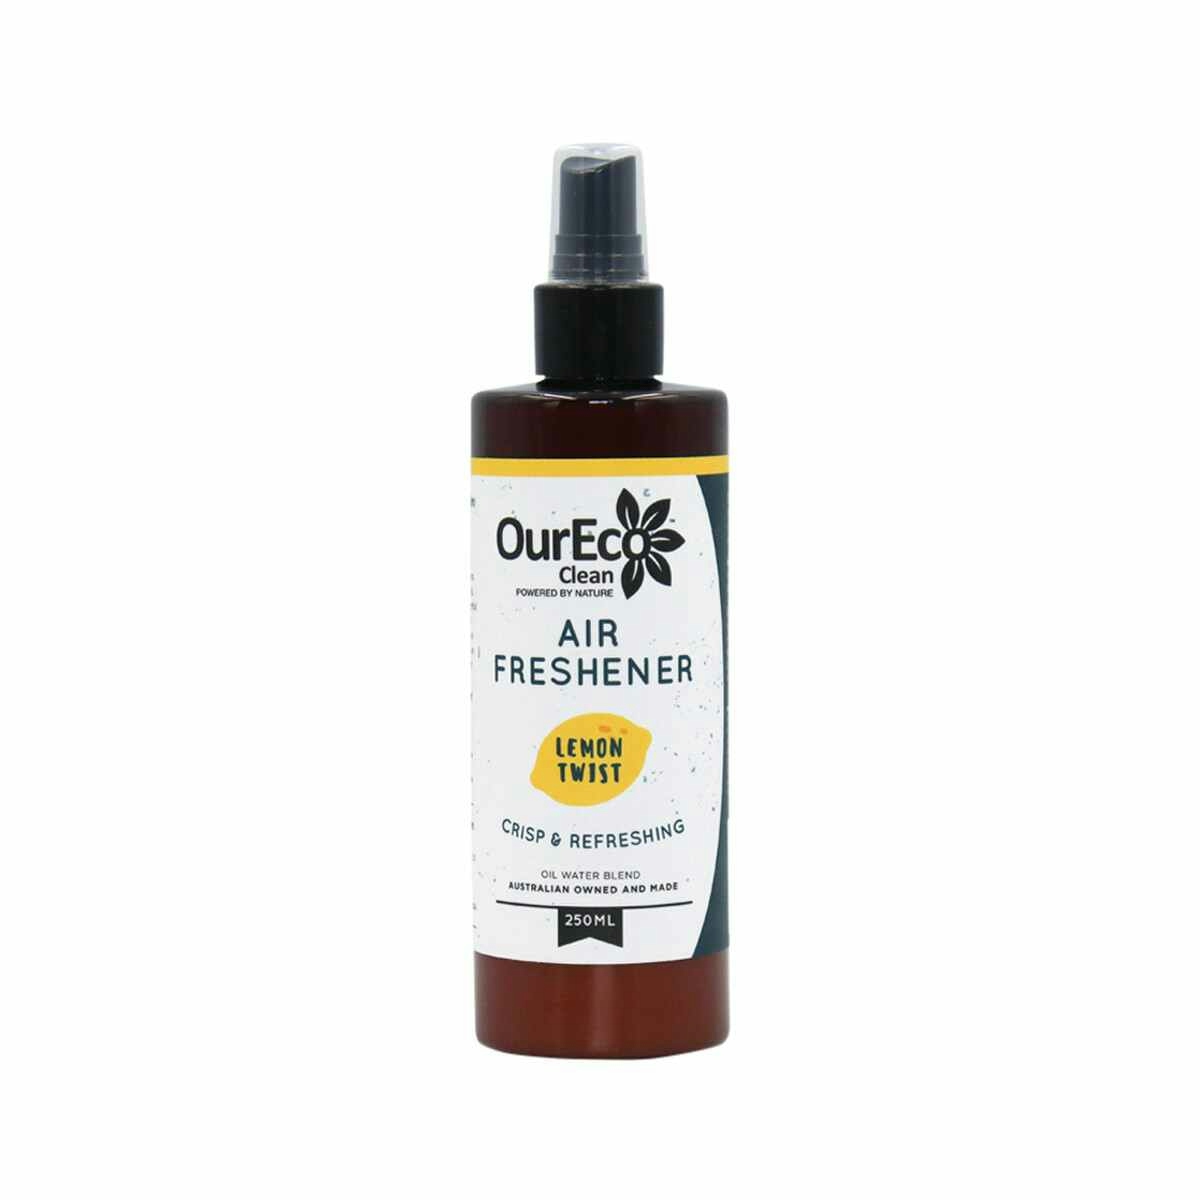 image of OurEco Clean Air Freshener Lemon Twist 250ml on white background